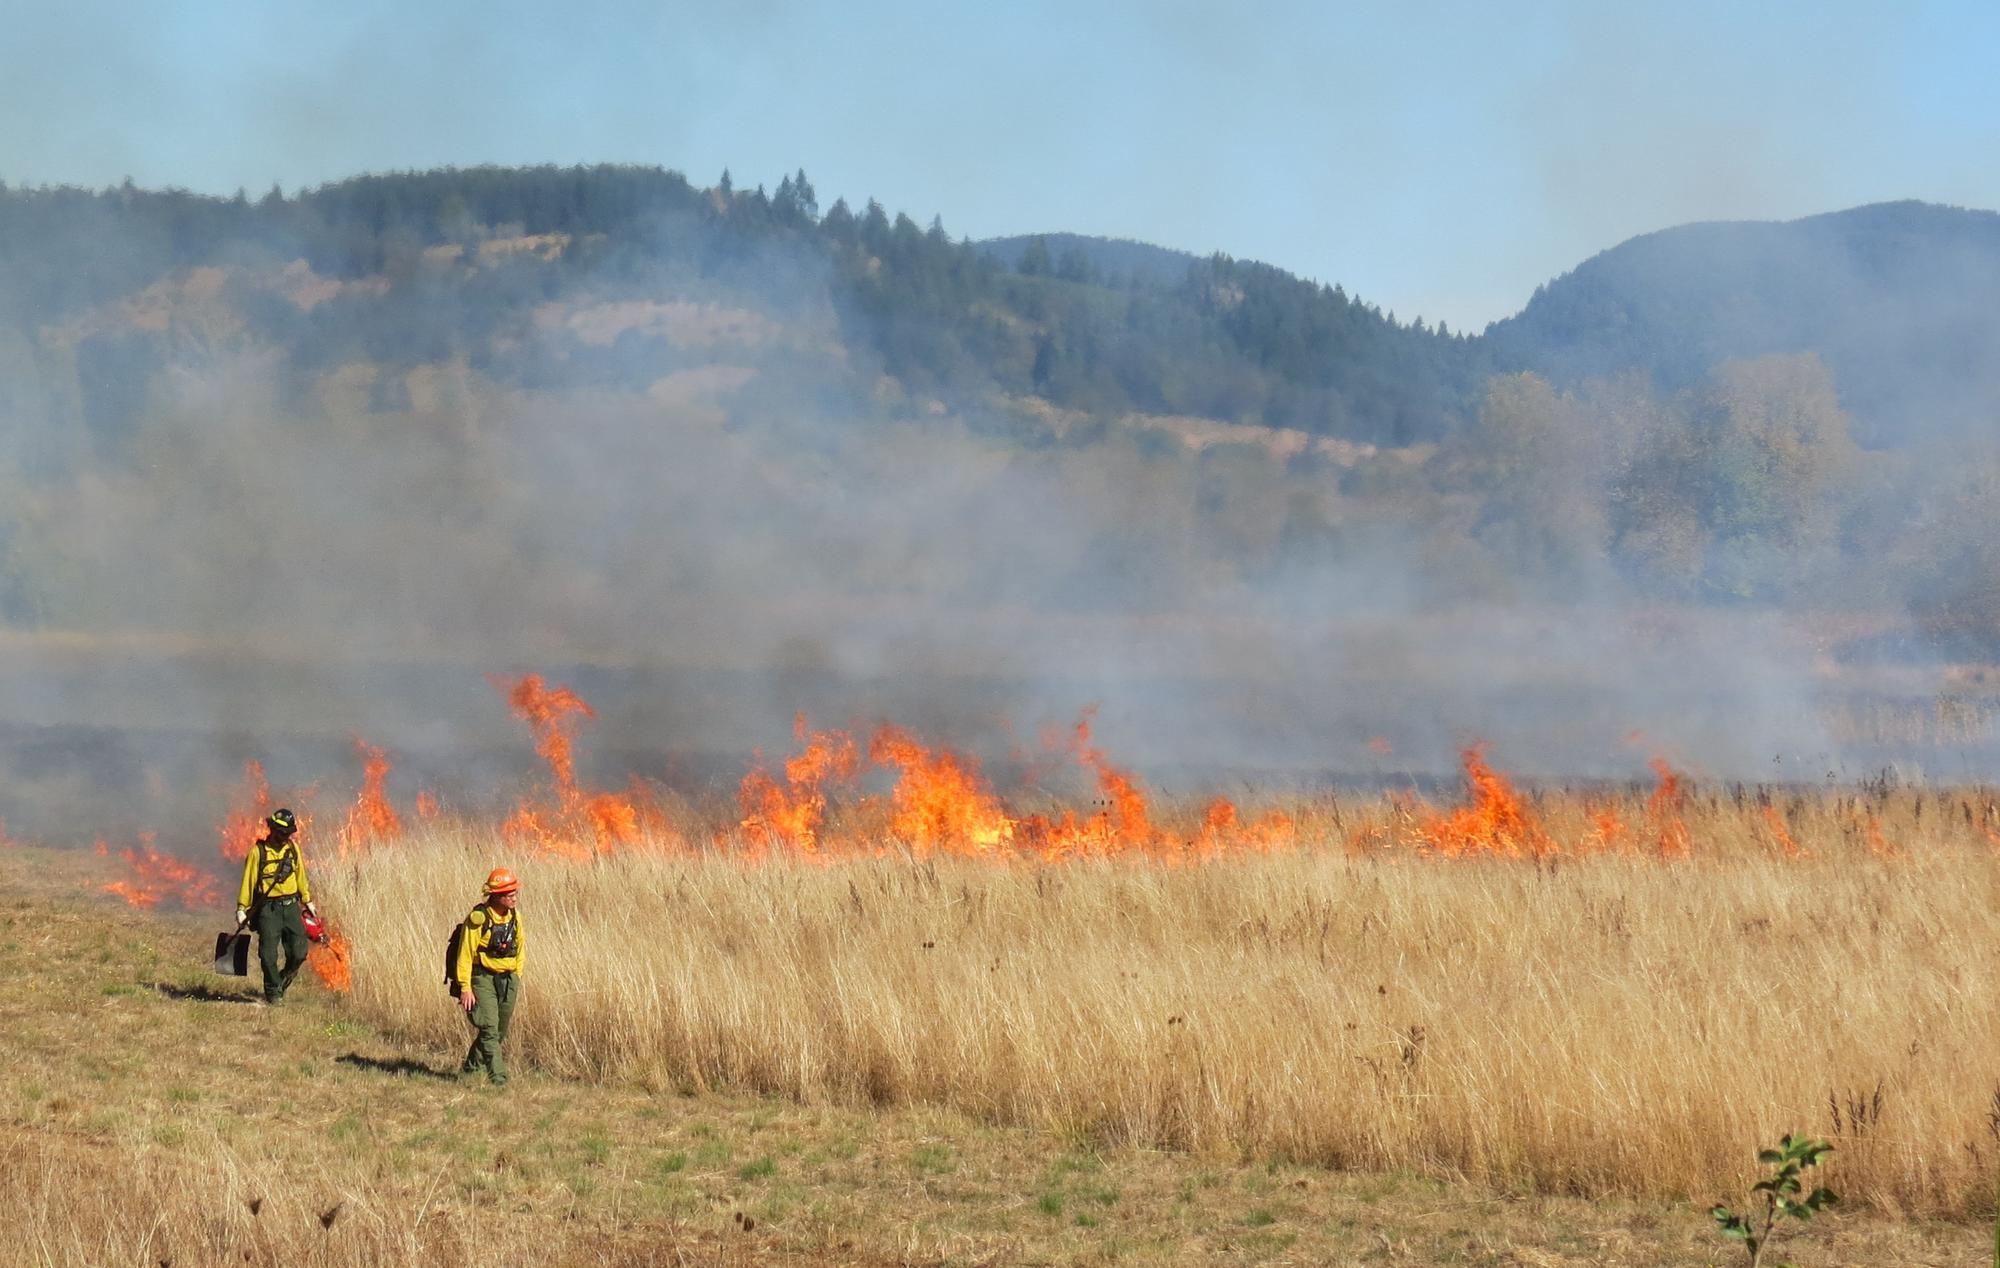 Two people move away from flames at the base of a hill